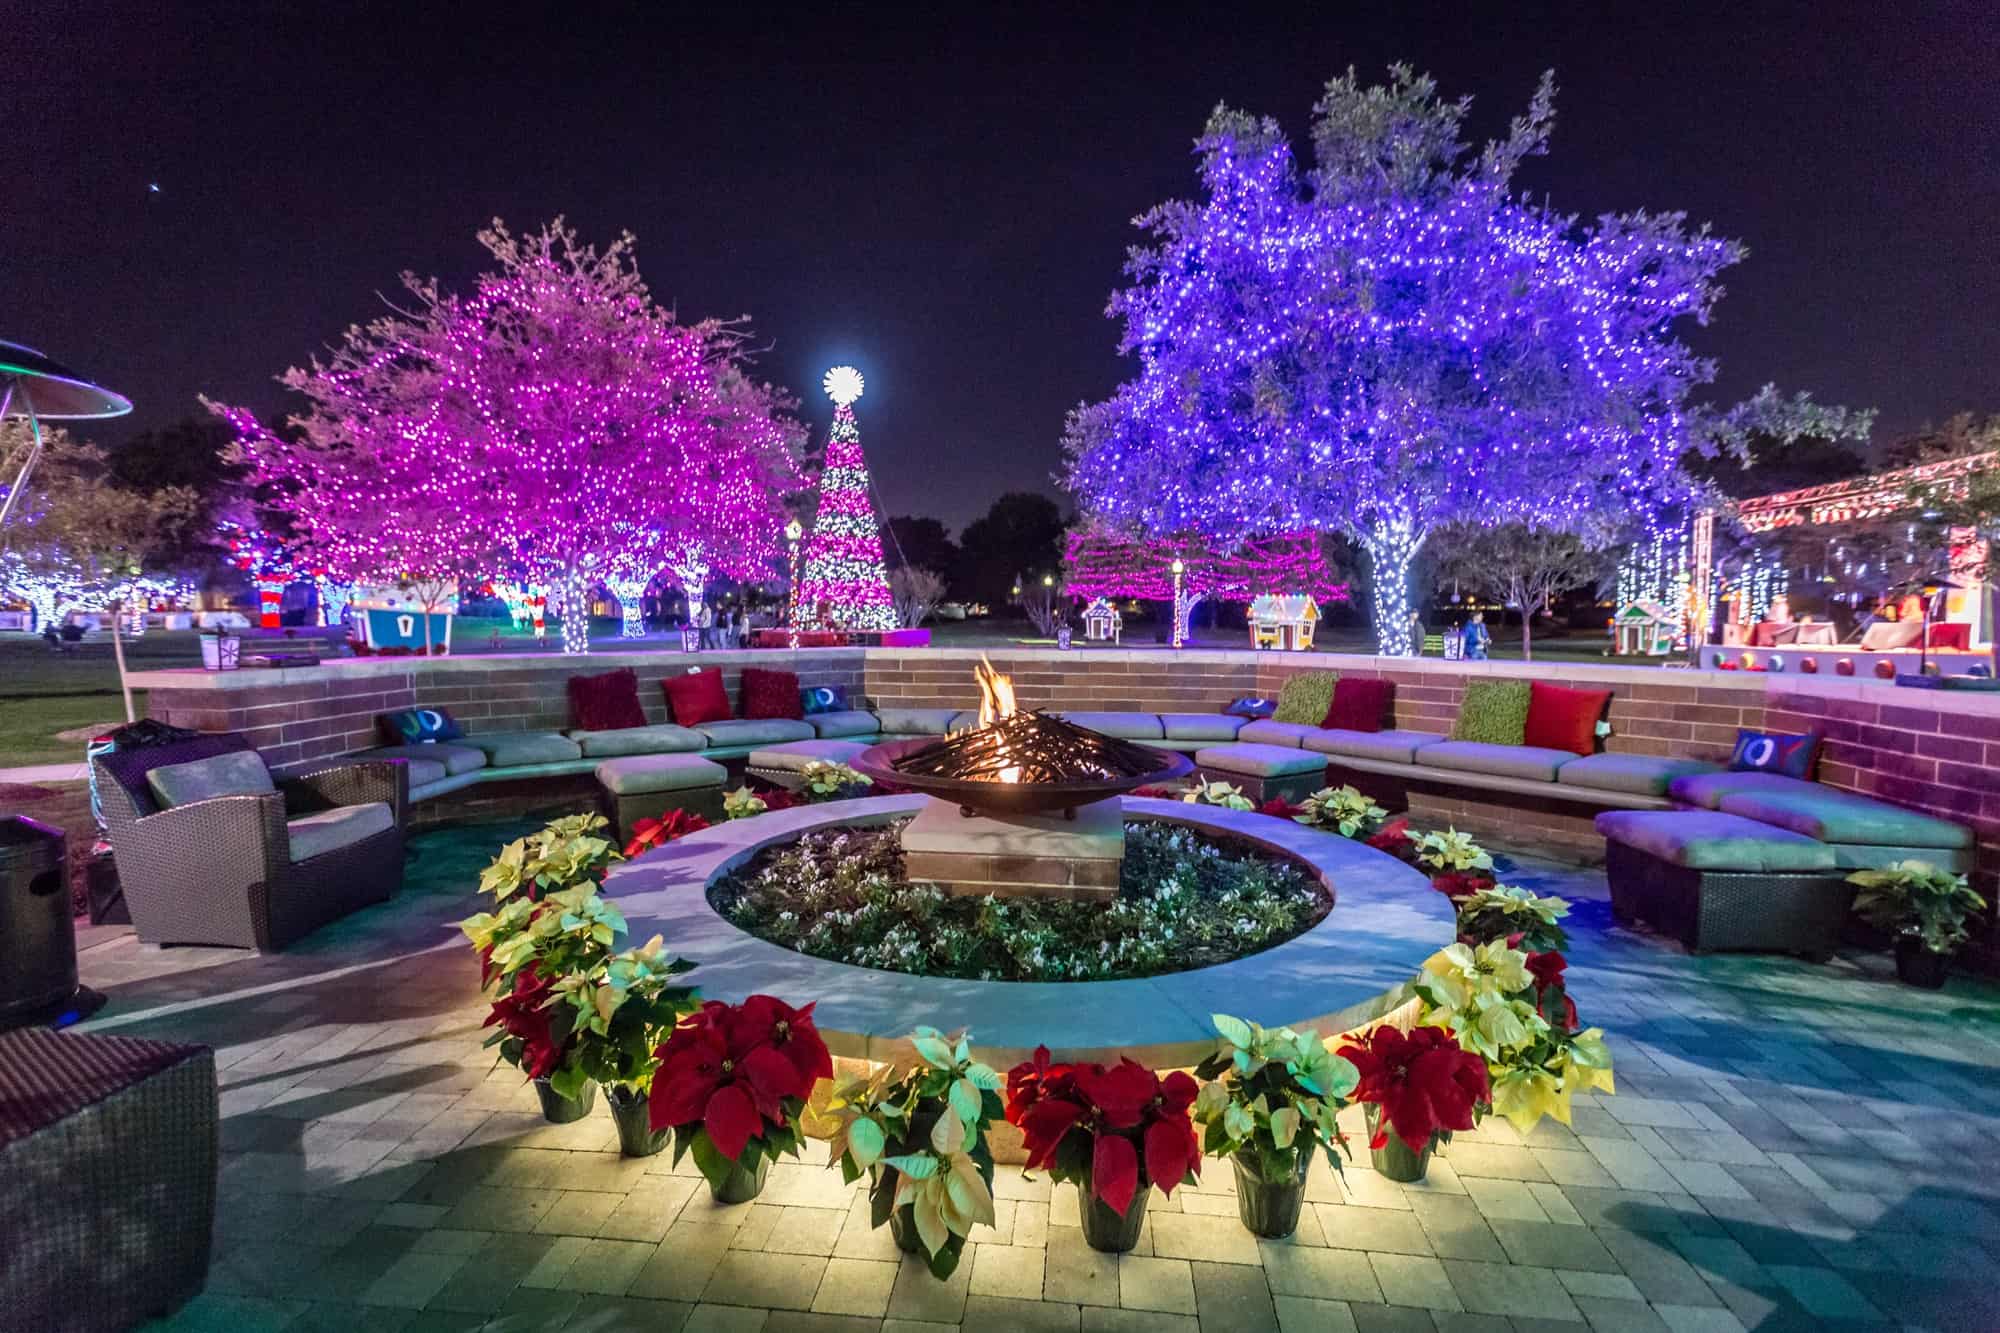 The Best Dallas Christmas Events for Families in 2020 ...